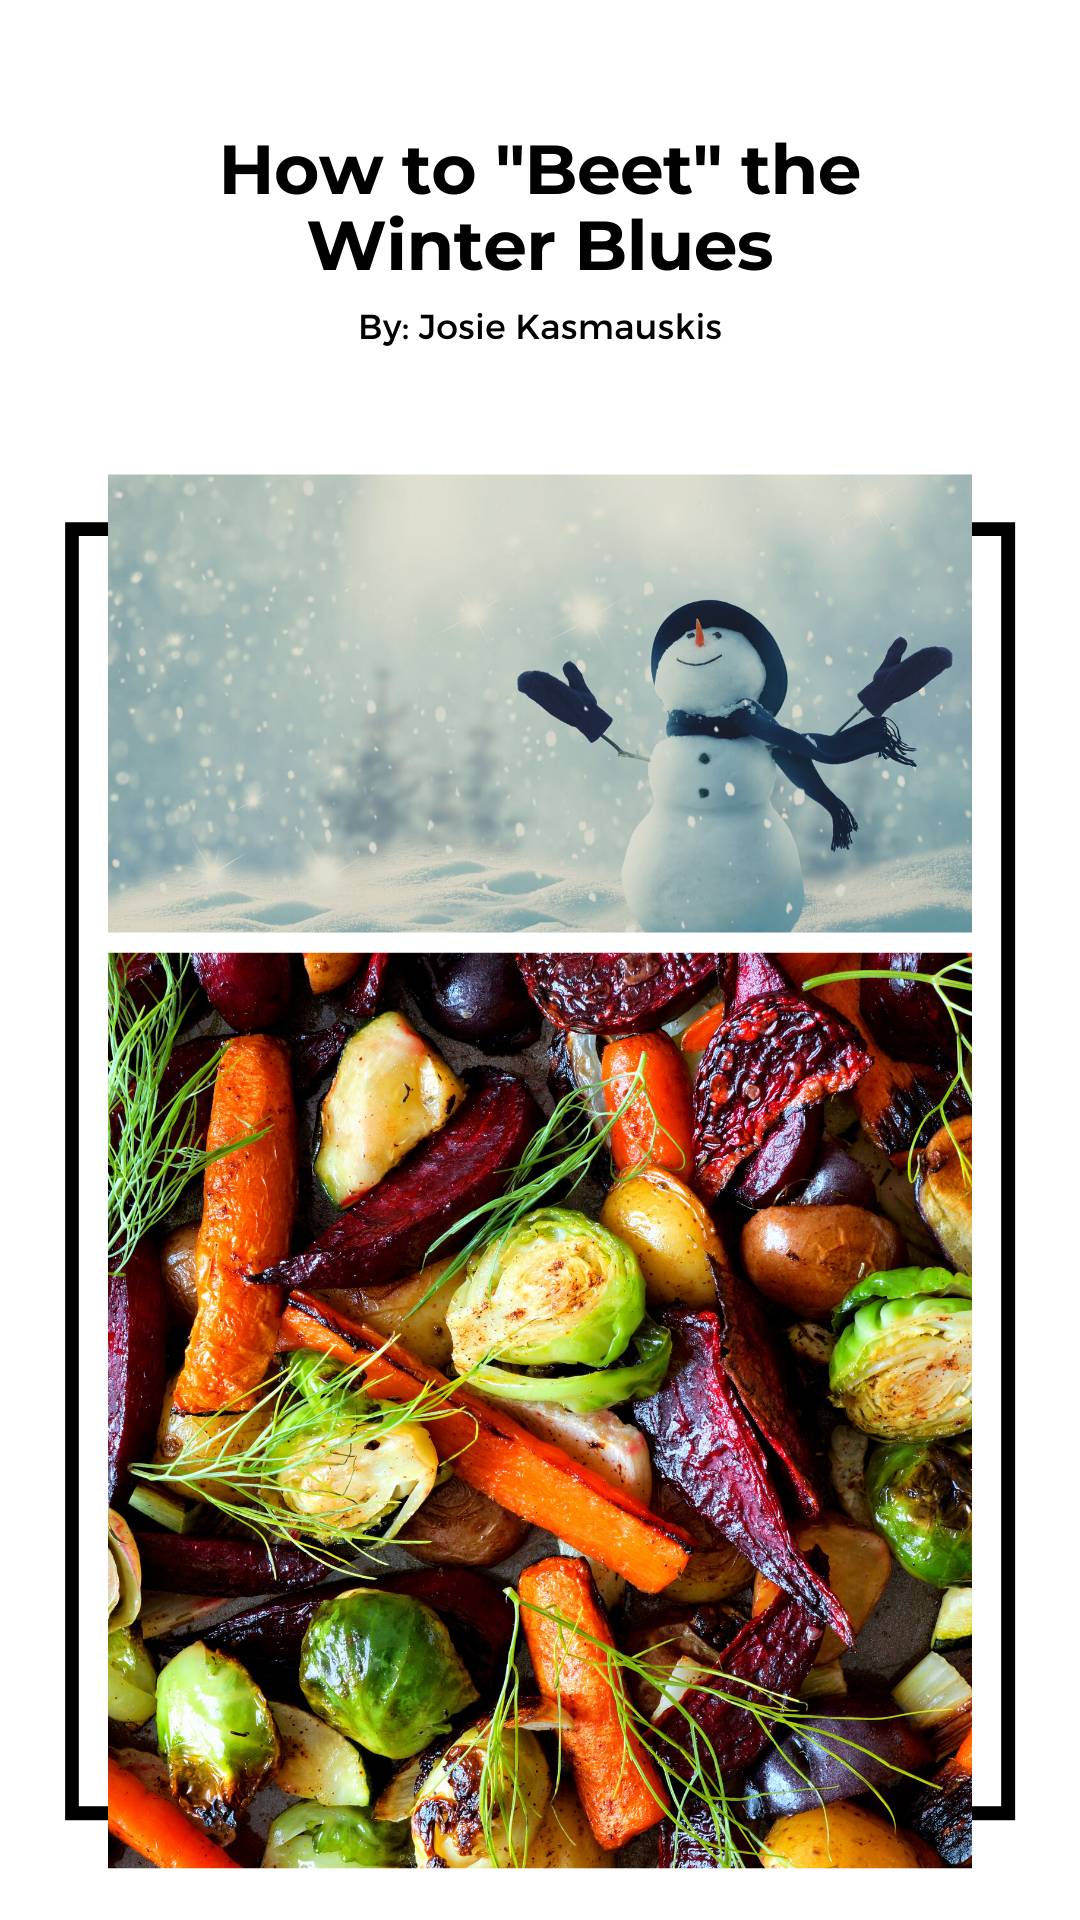 Image of a title page that says "How to "Beet" the Winter Blues" with a picture of a snowman smiling and a picture of winter root vegetables.